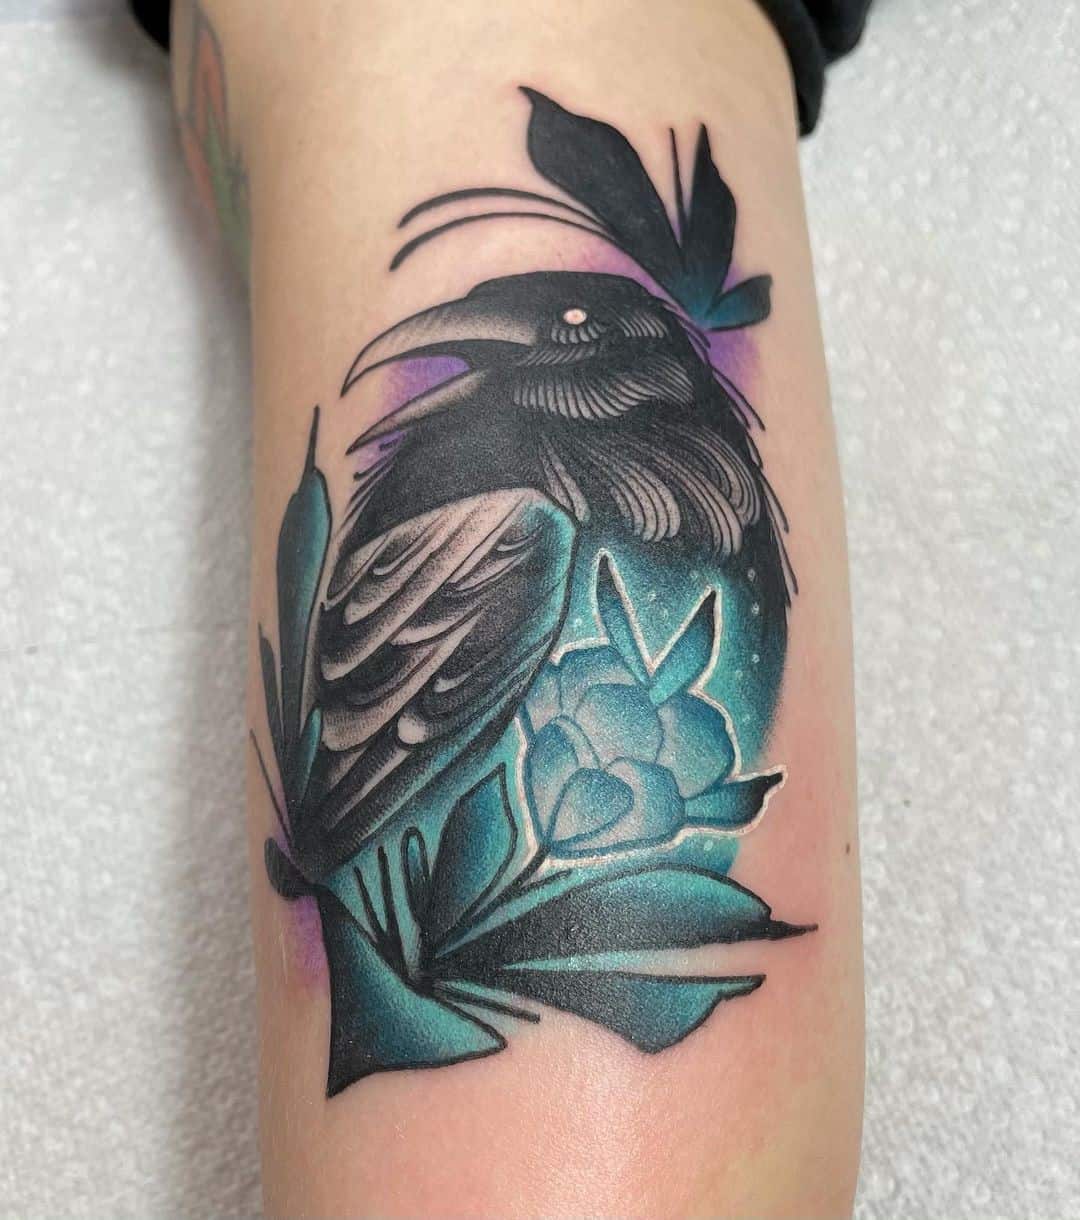 Raven Tattoo Small Design And Bright Ink